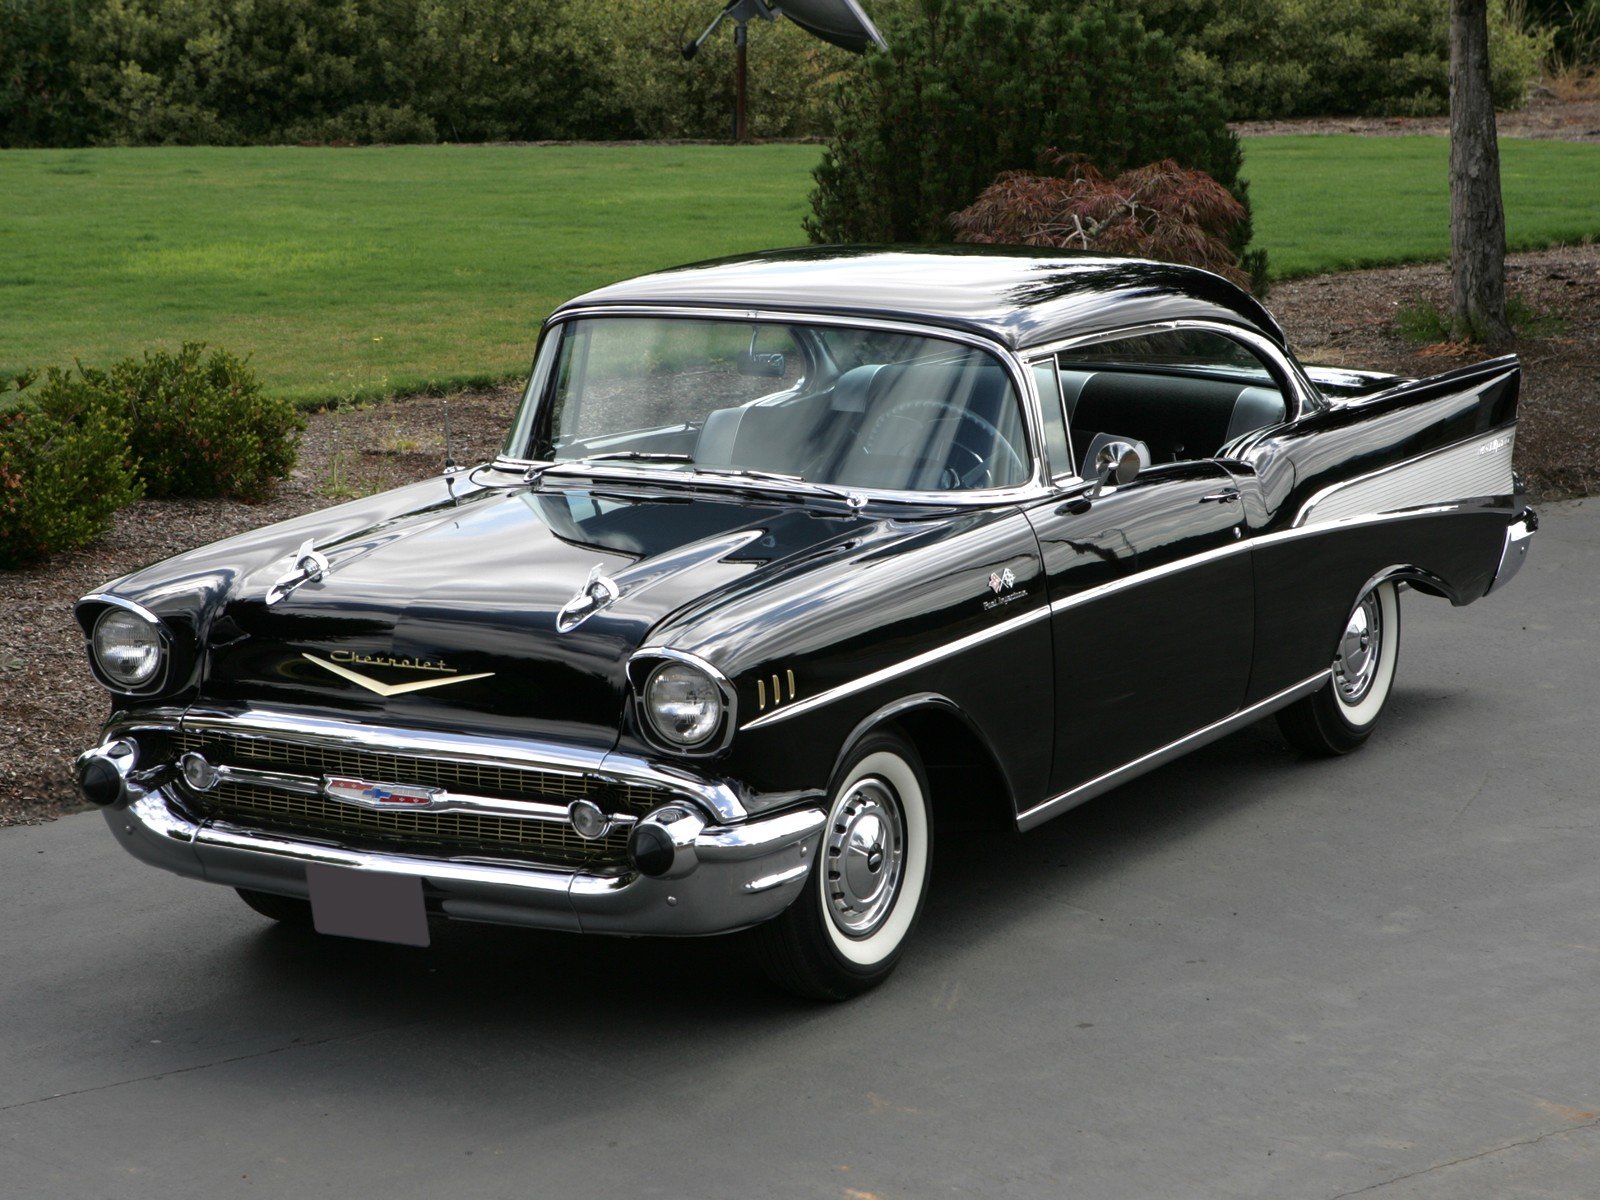 Chevrolet Bel Air Pics, Vehicles Collection